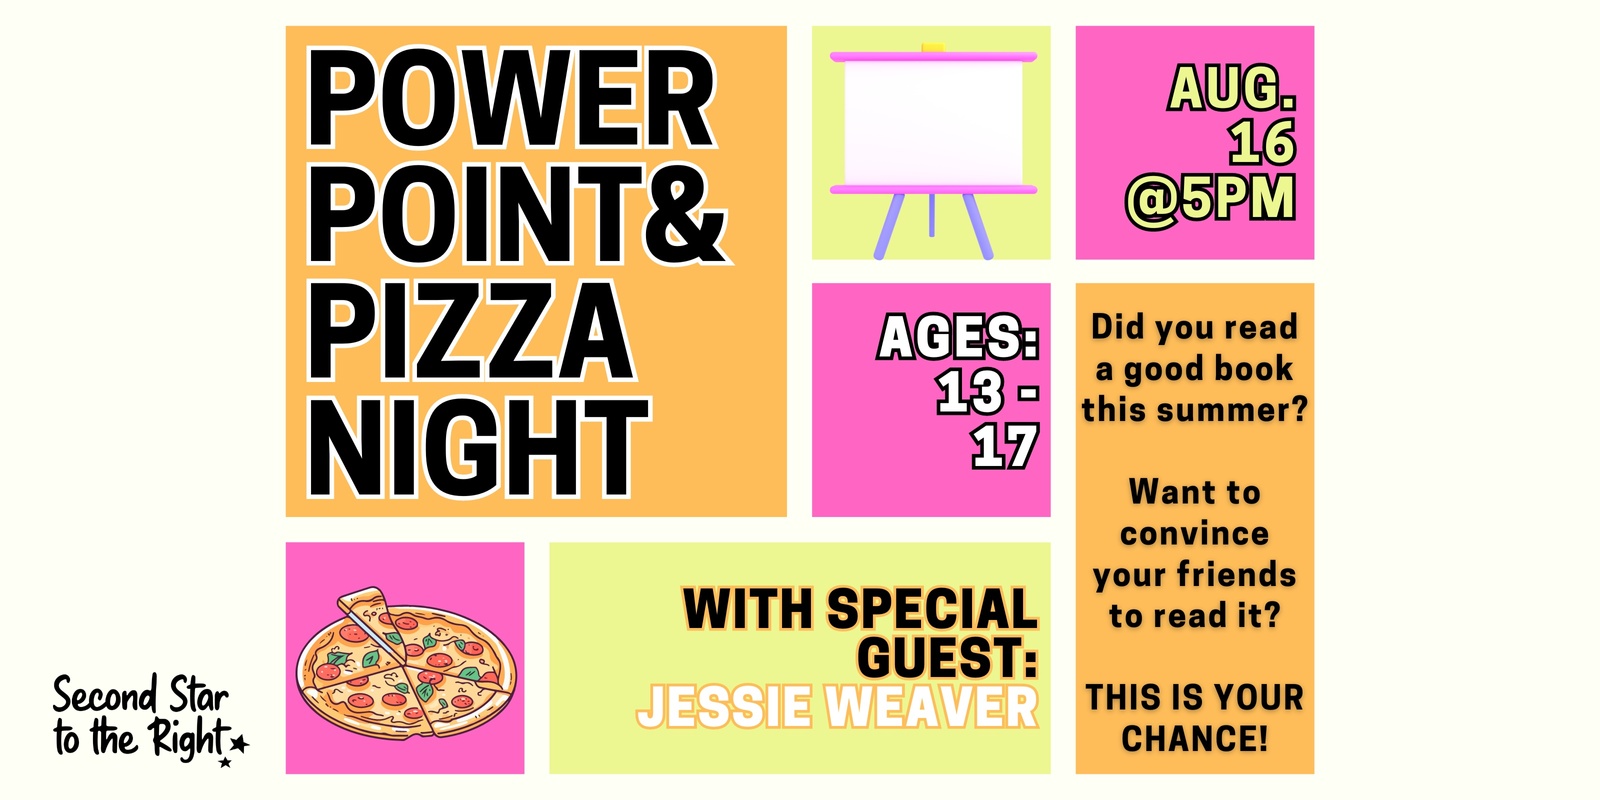 Banner image for Teen's PowerPoint & Pizza Night with Jessie Weaver